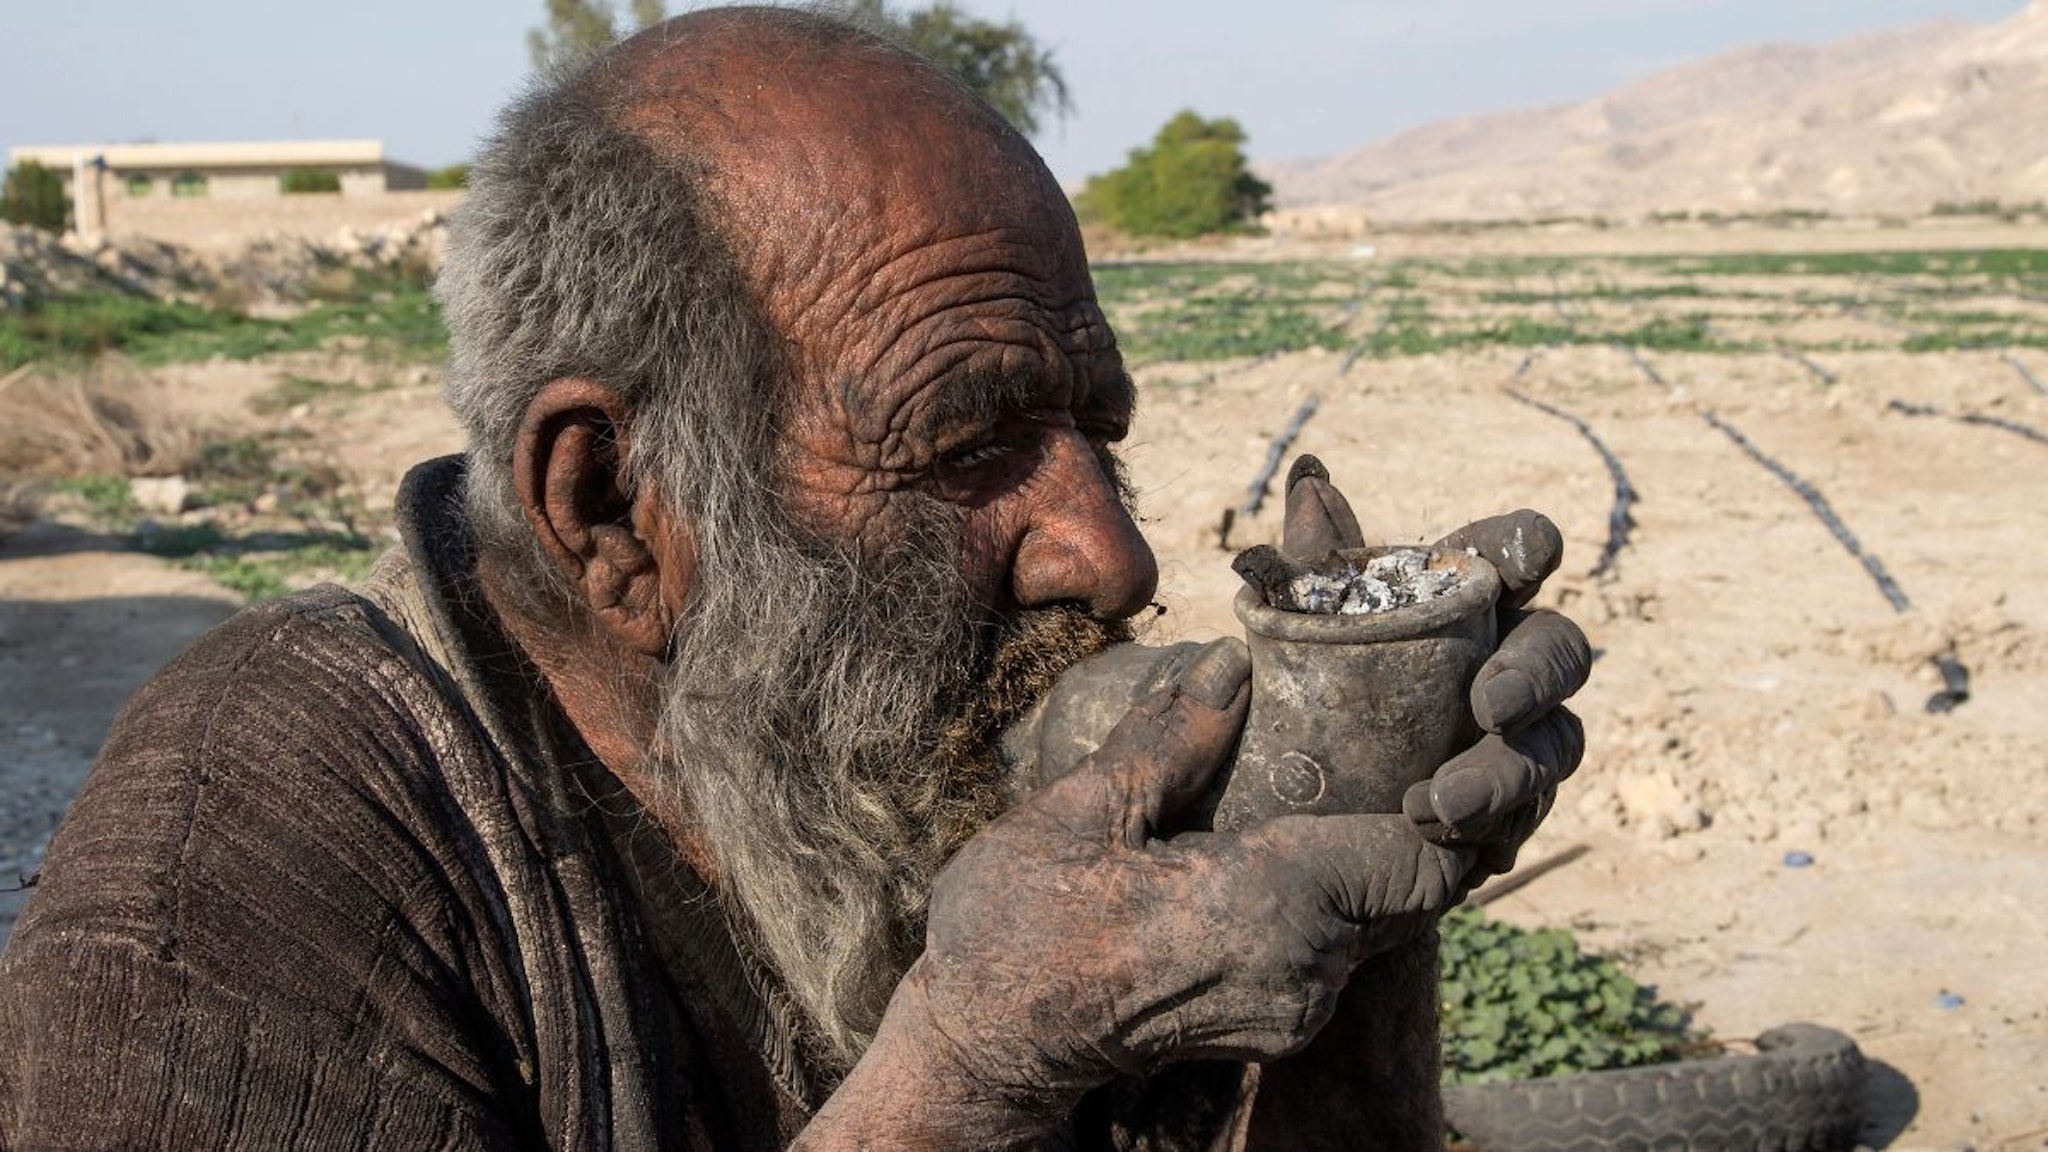 Amou Haji (uncle Haji) smokes from his waterpipe as he sits on the ground on the outskirts of the village of Dezhgah in the Dehram district of the southwestern Iranian Fars province, on December 28, 2018.